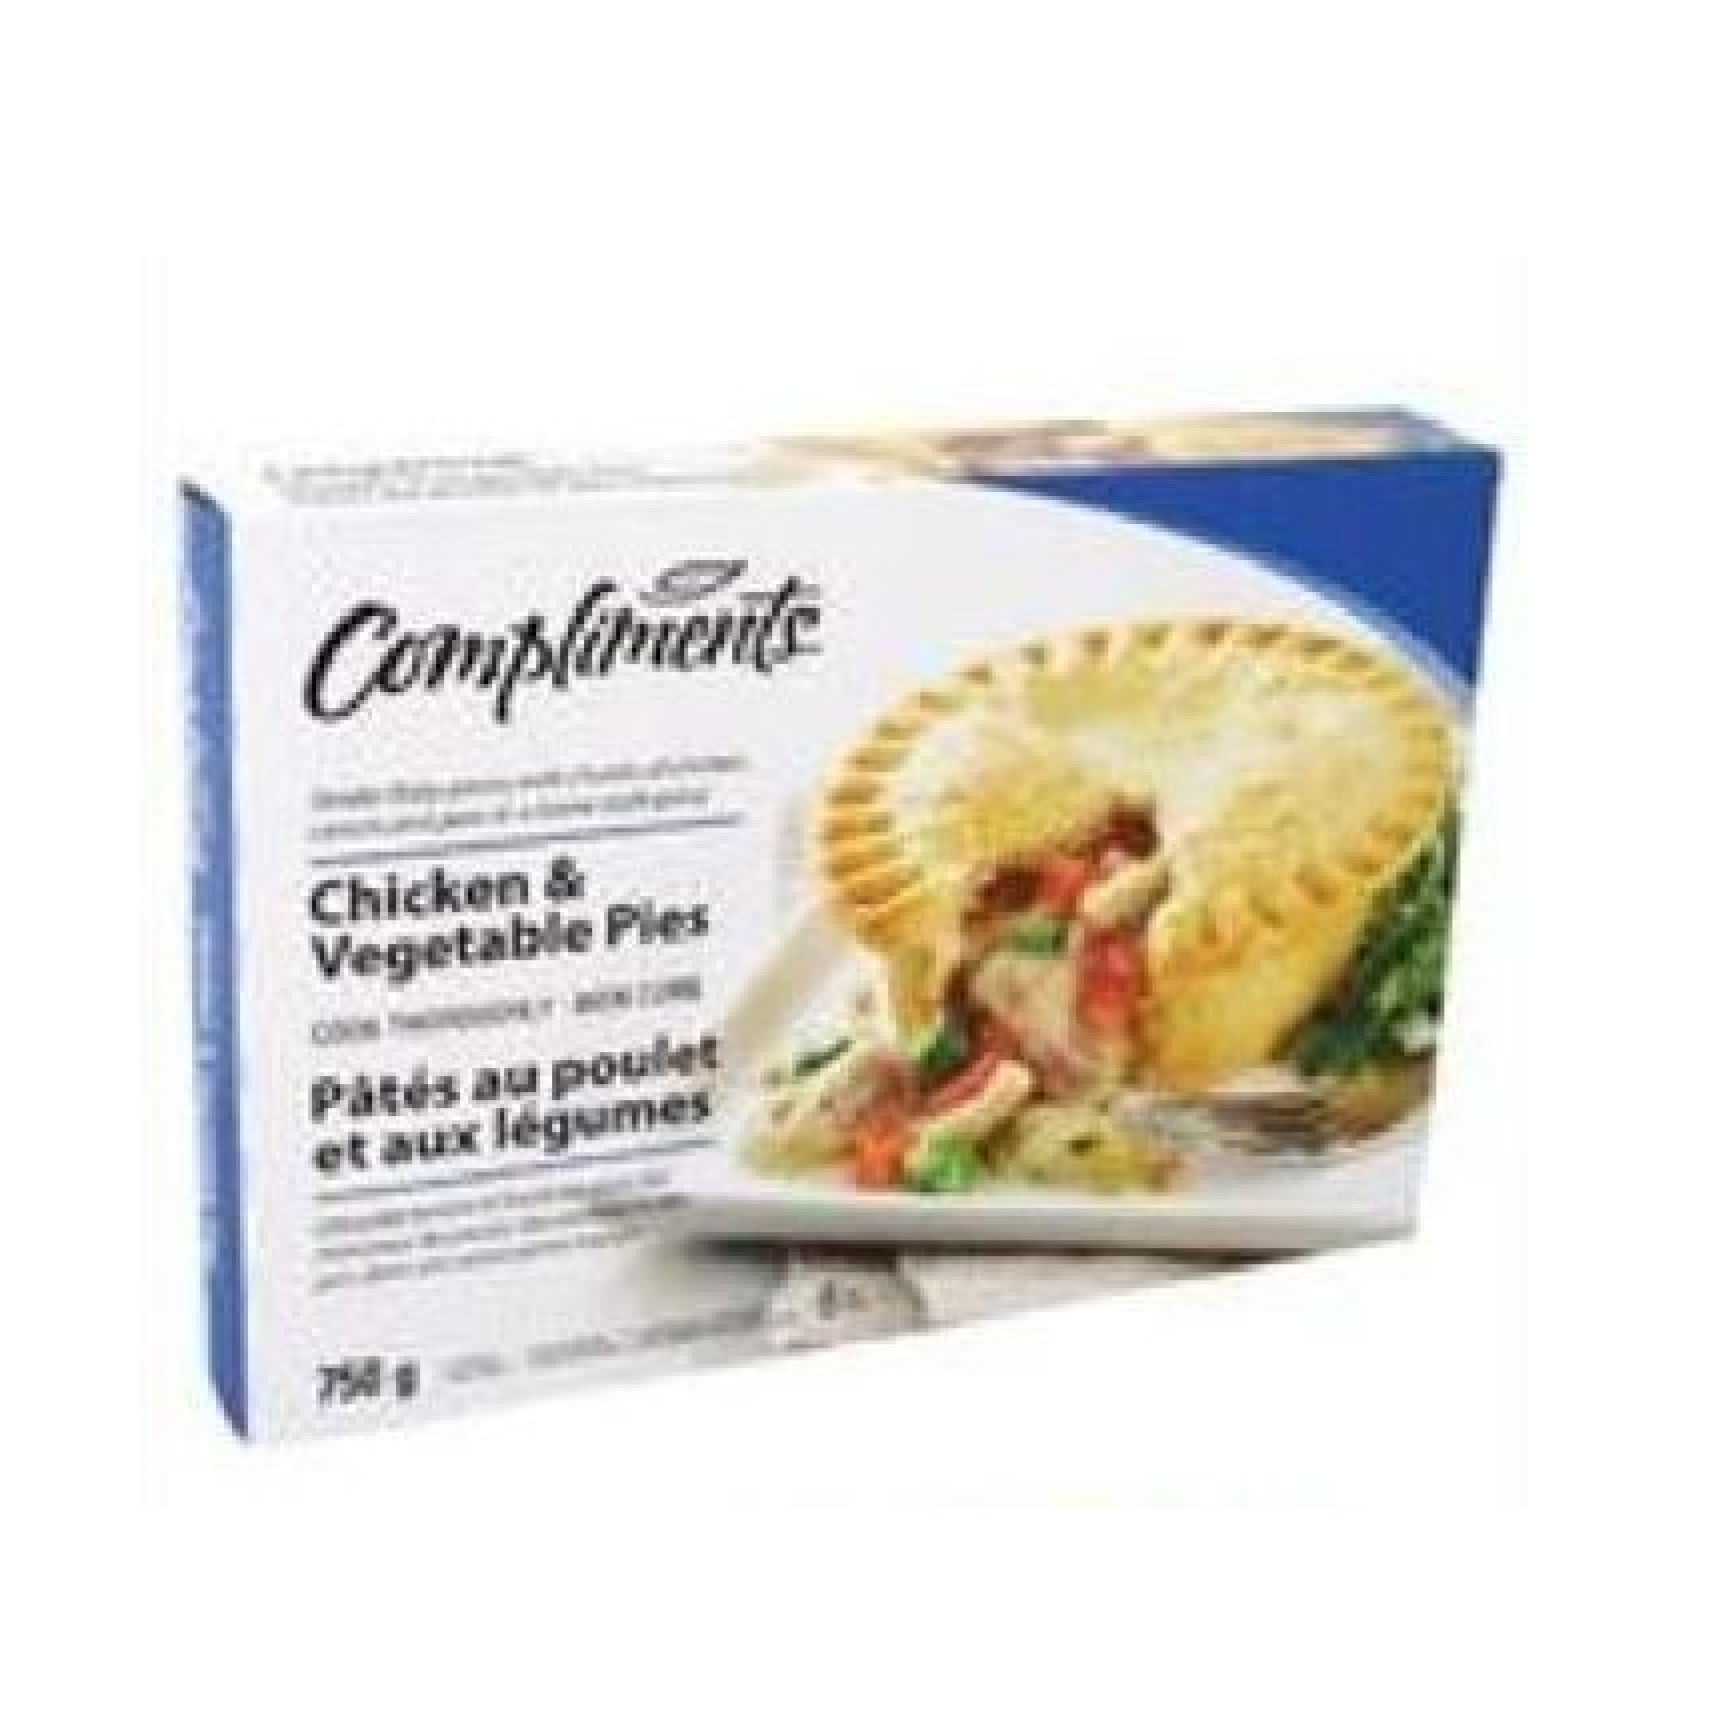 Compliments Chicken & Vegetable Pie, 750g